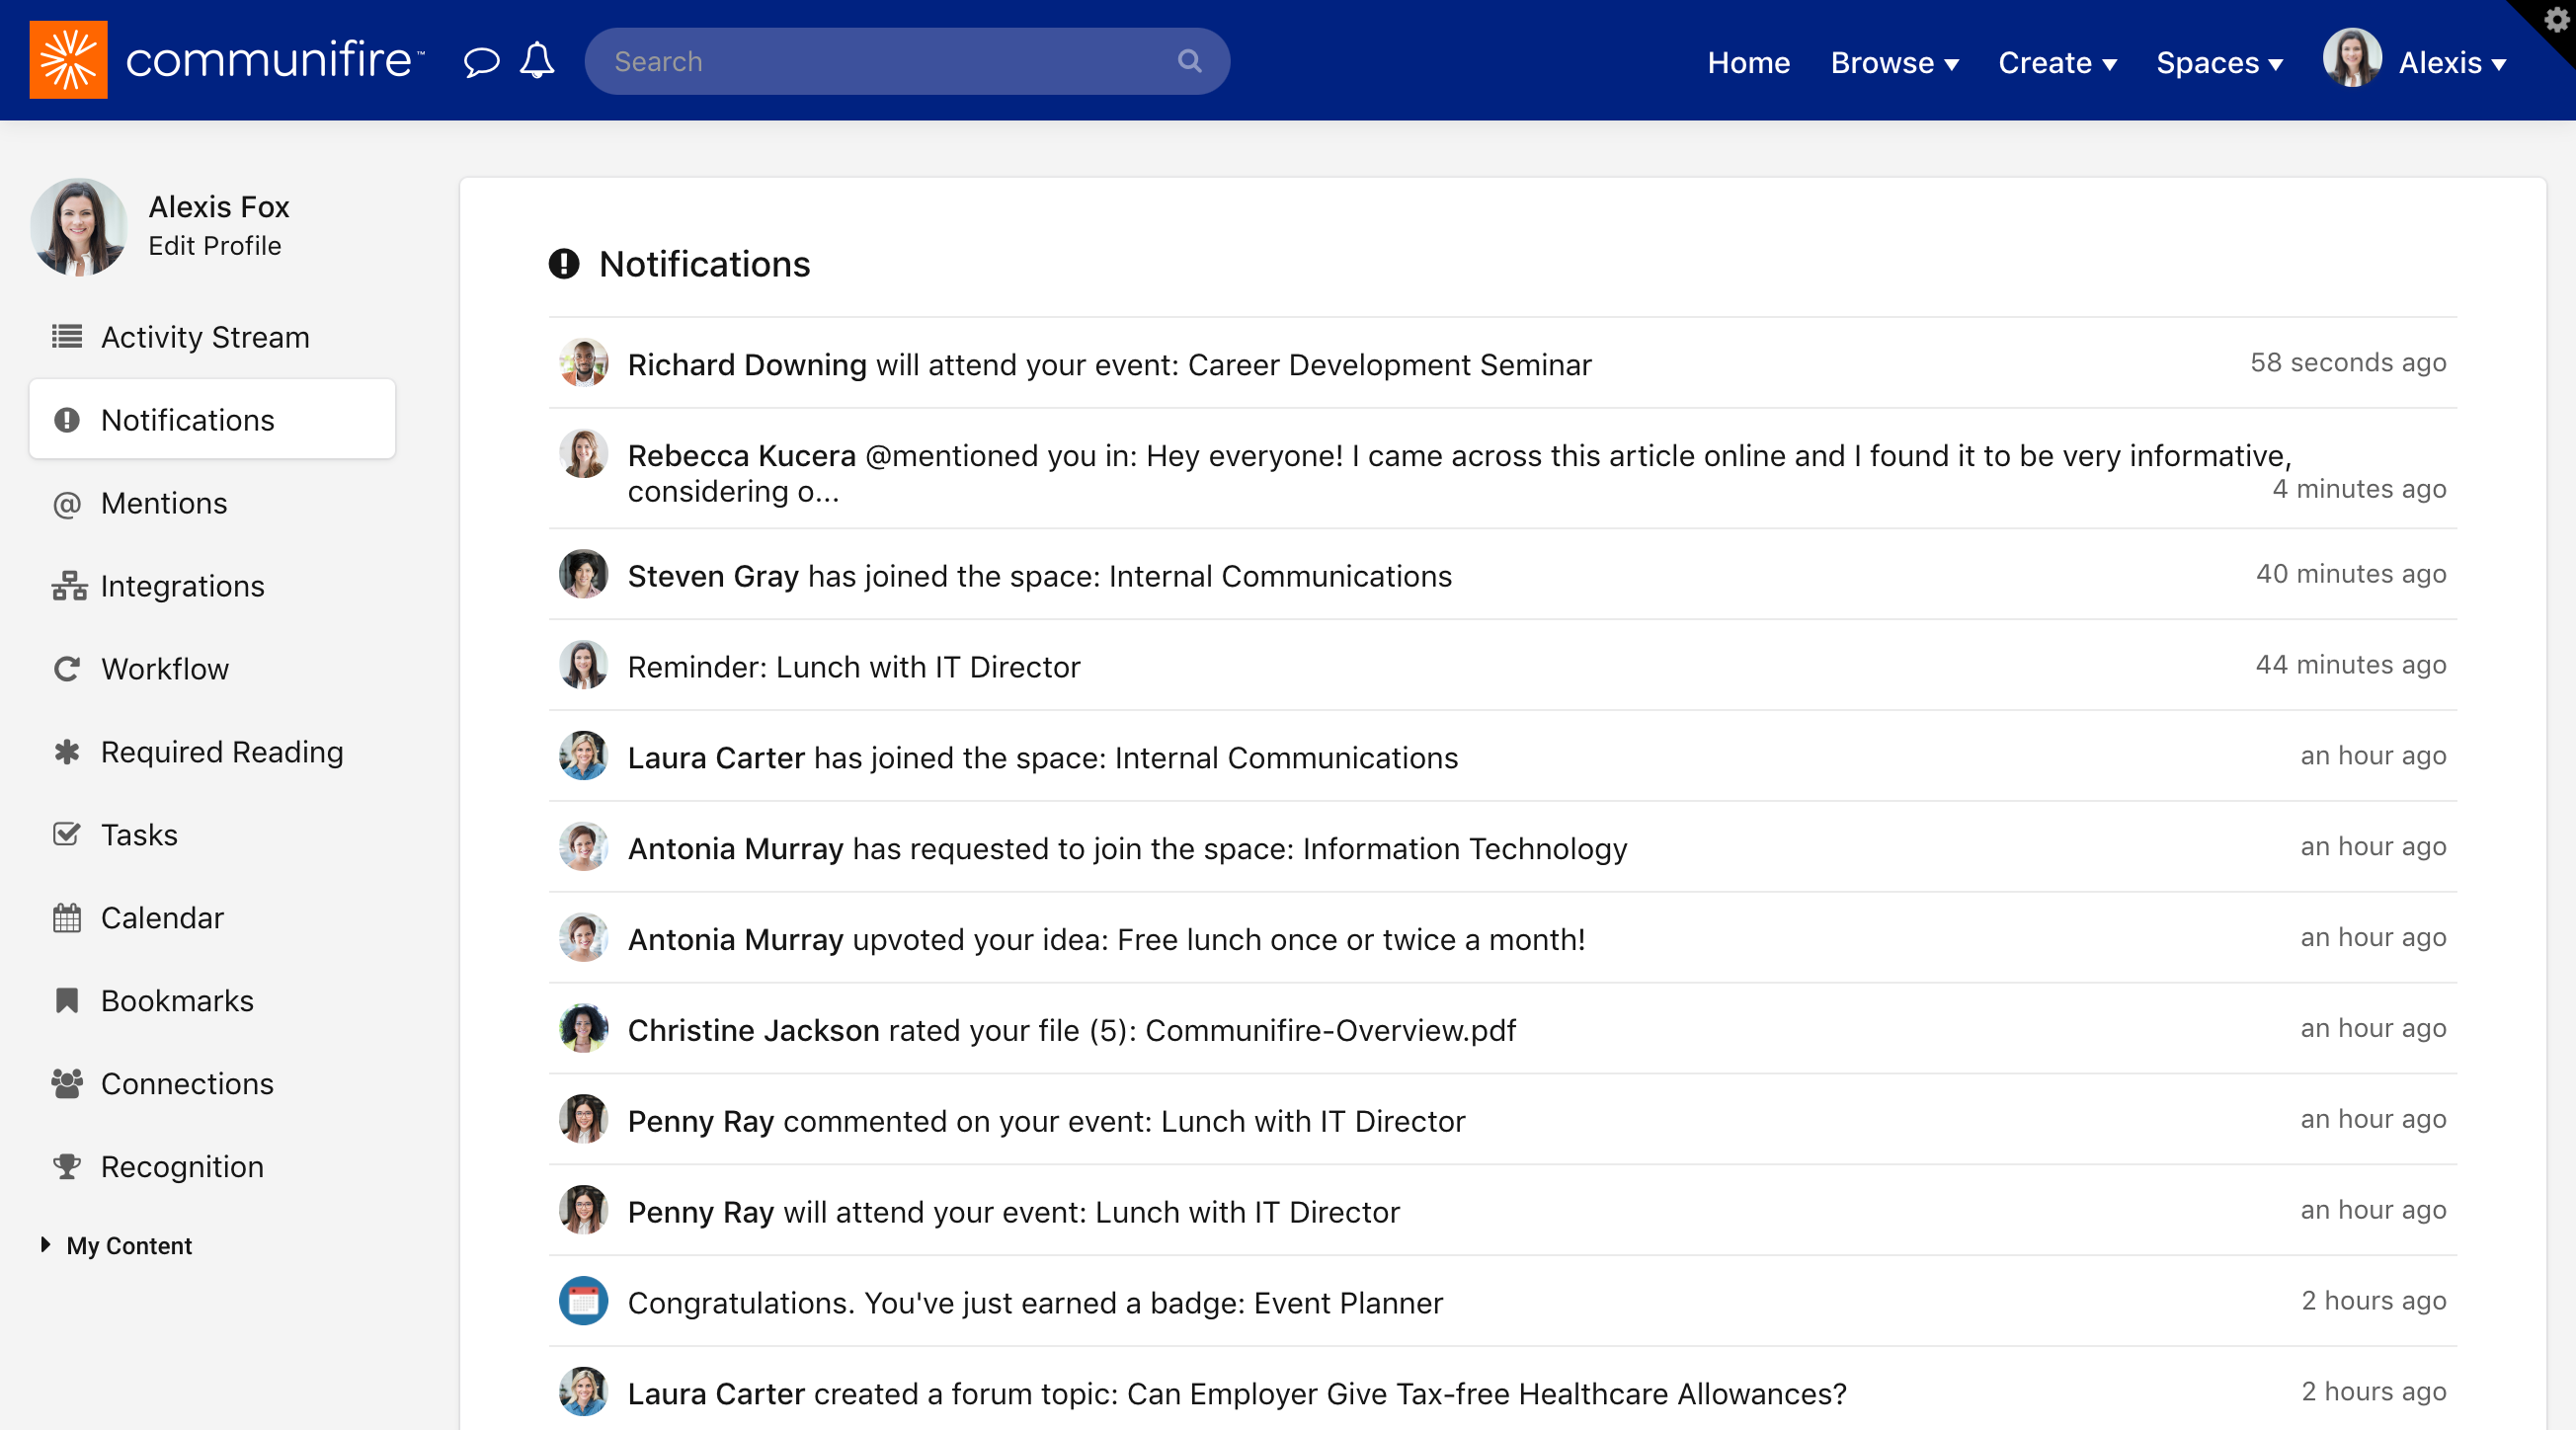 The Notifications page